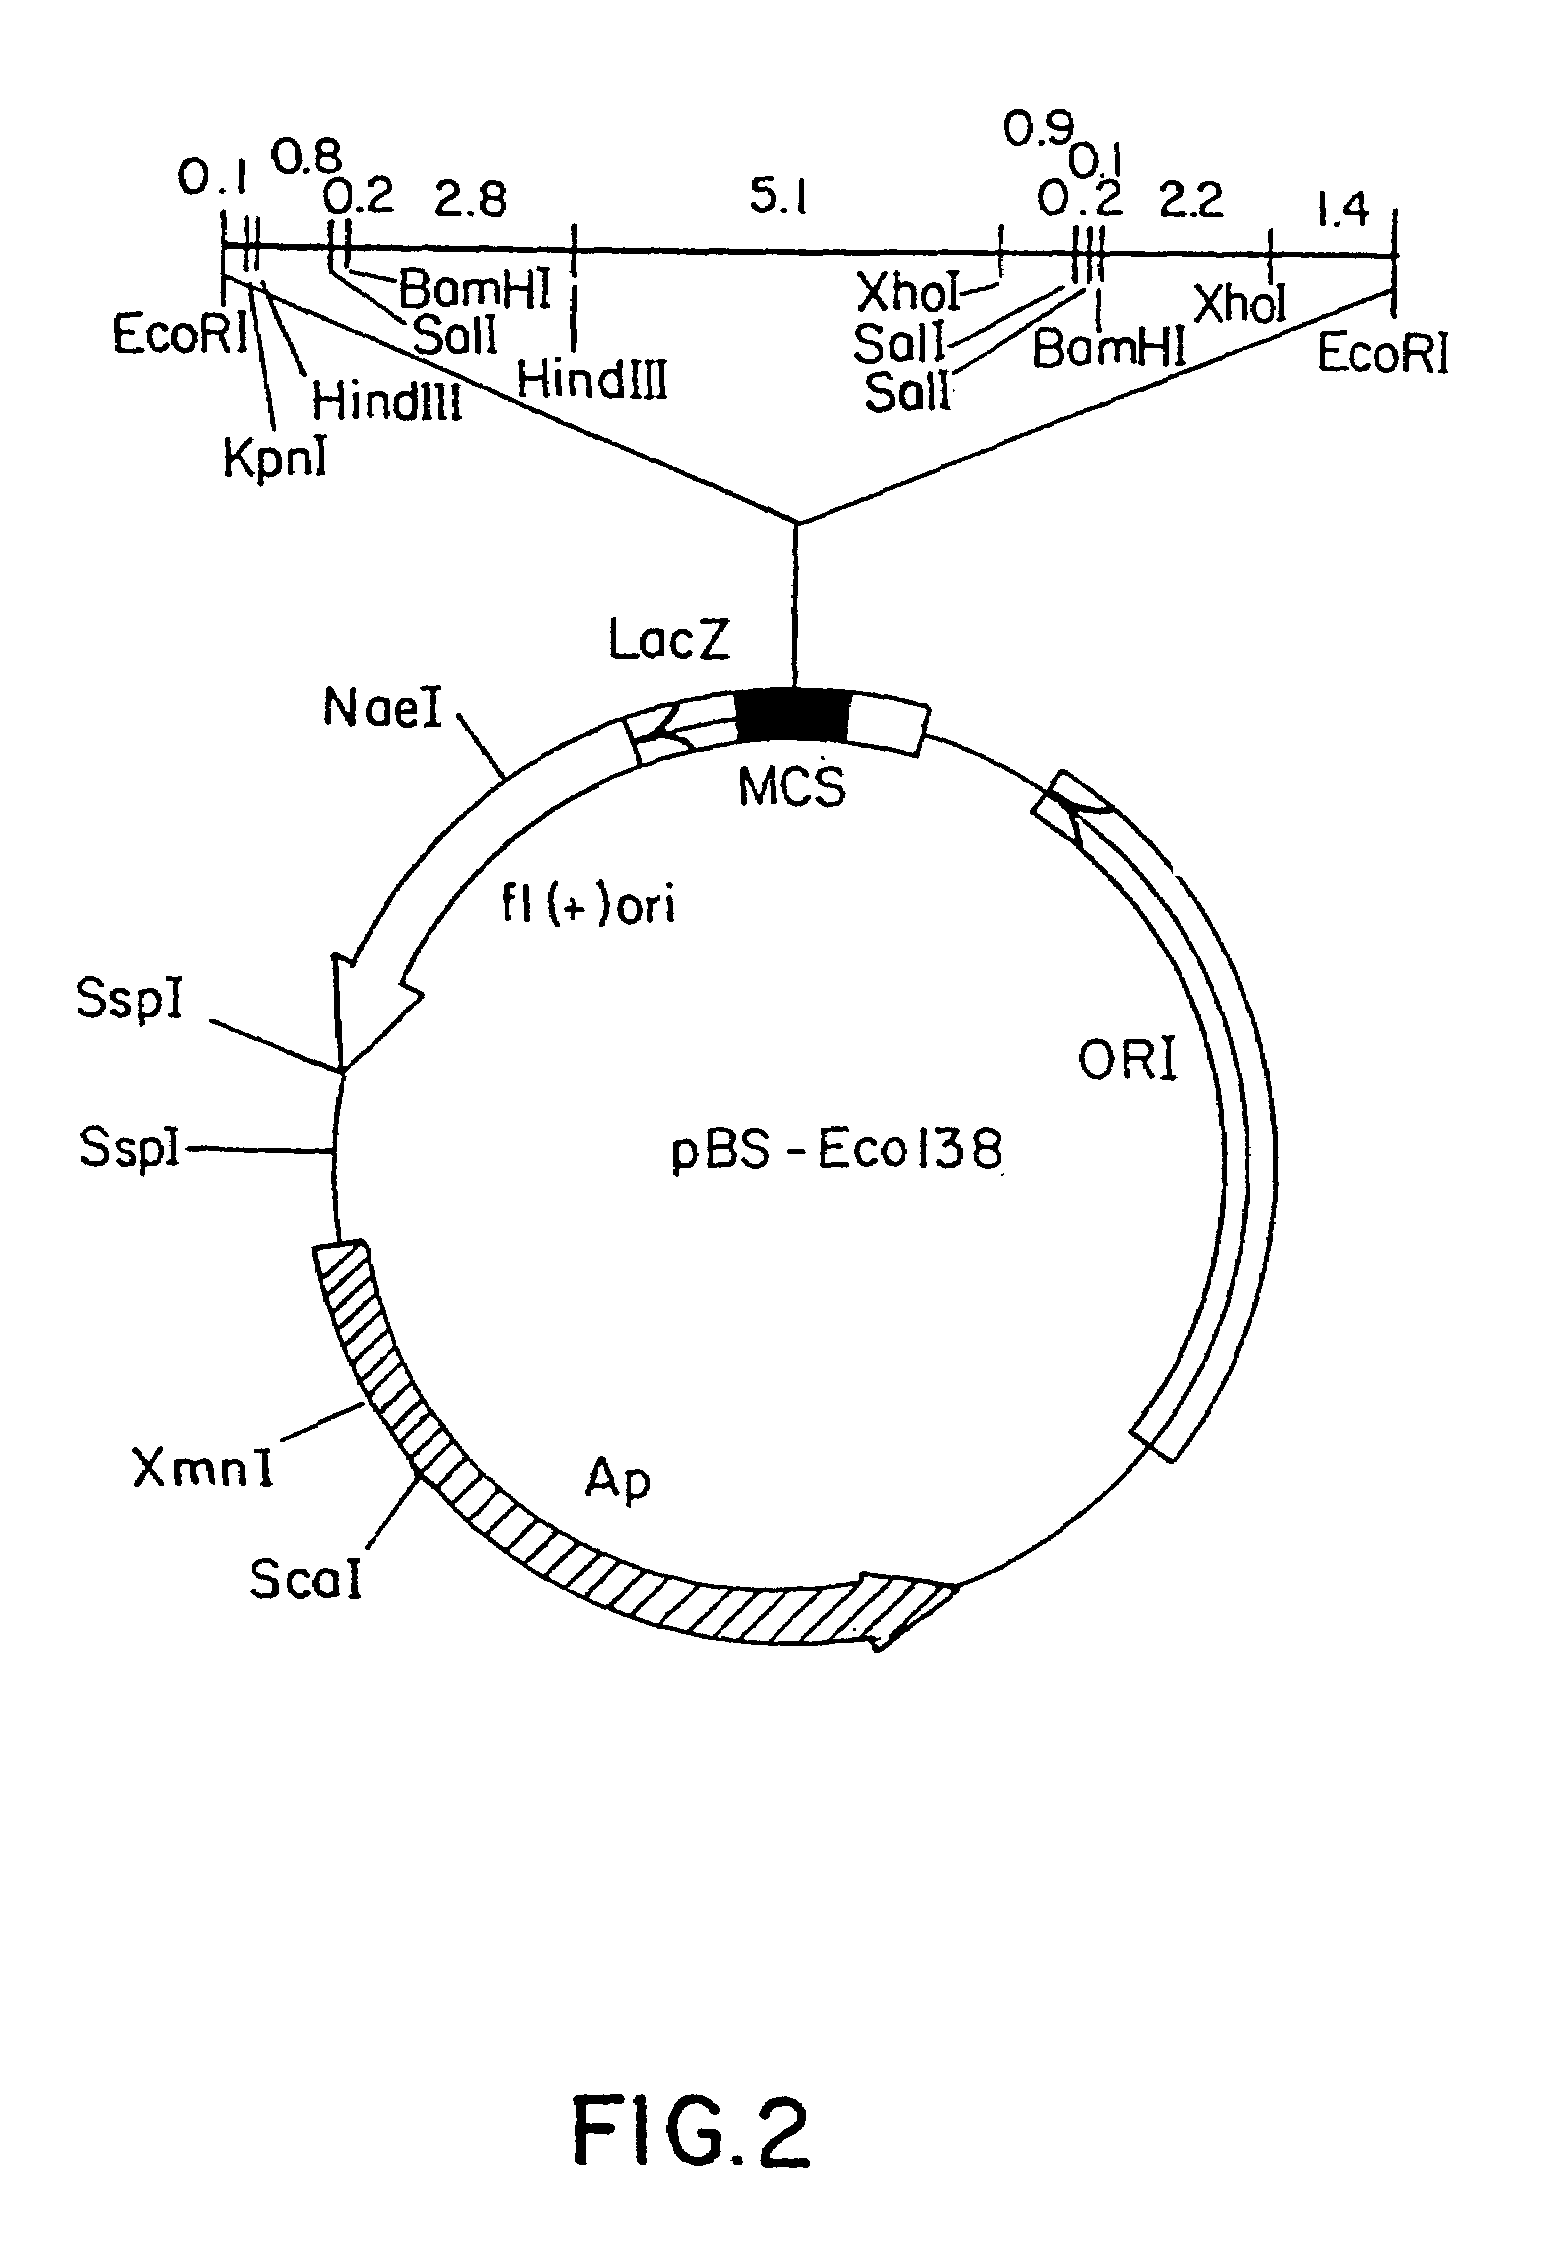 Methods of conferring ppo-inhibiting herbicide resistance to plants by gene manipulation